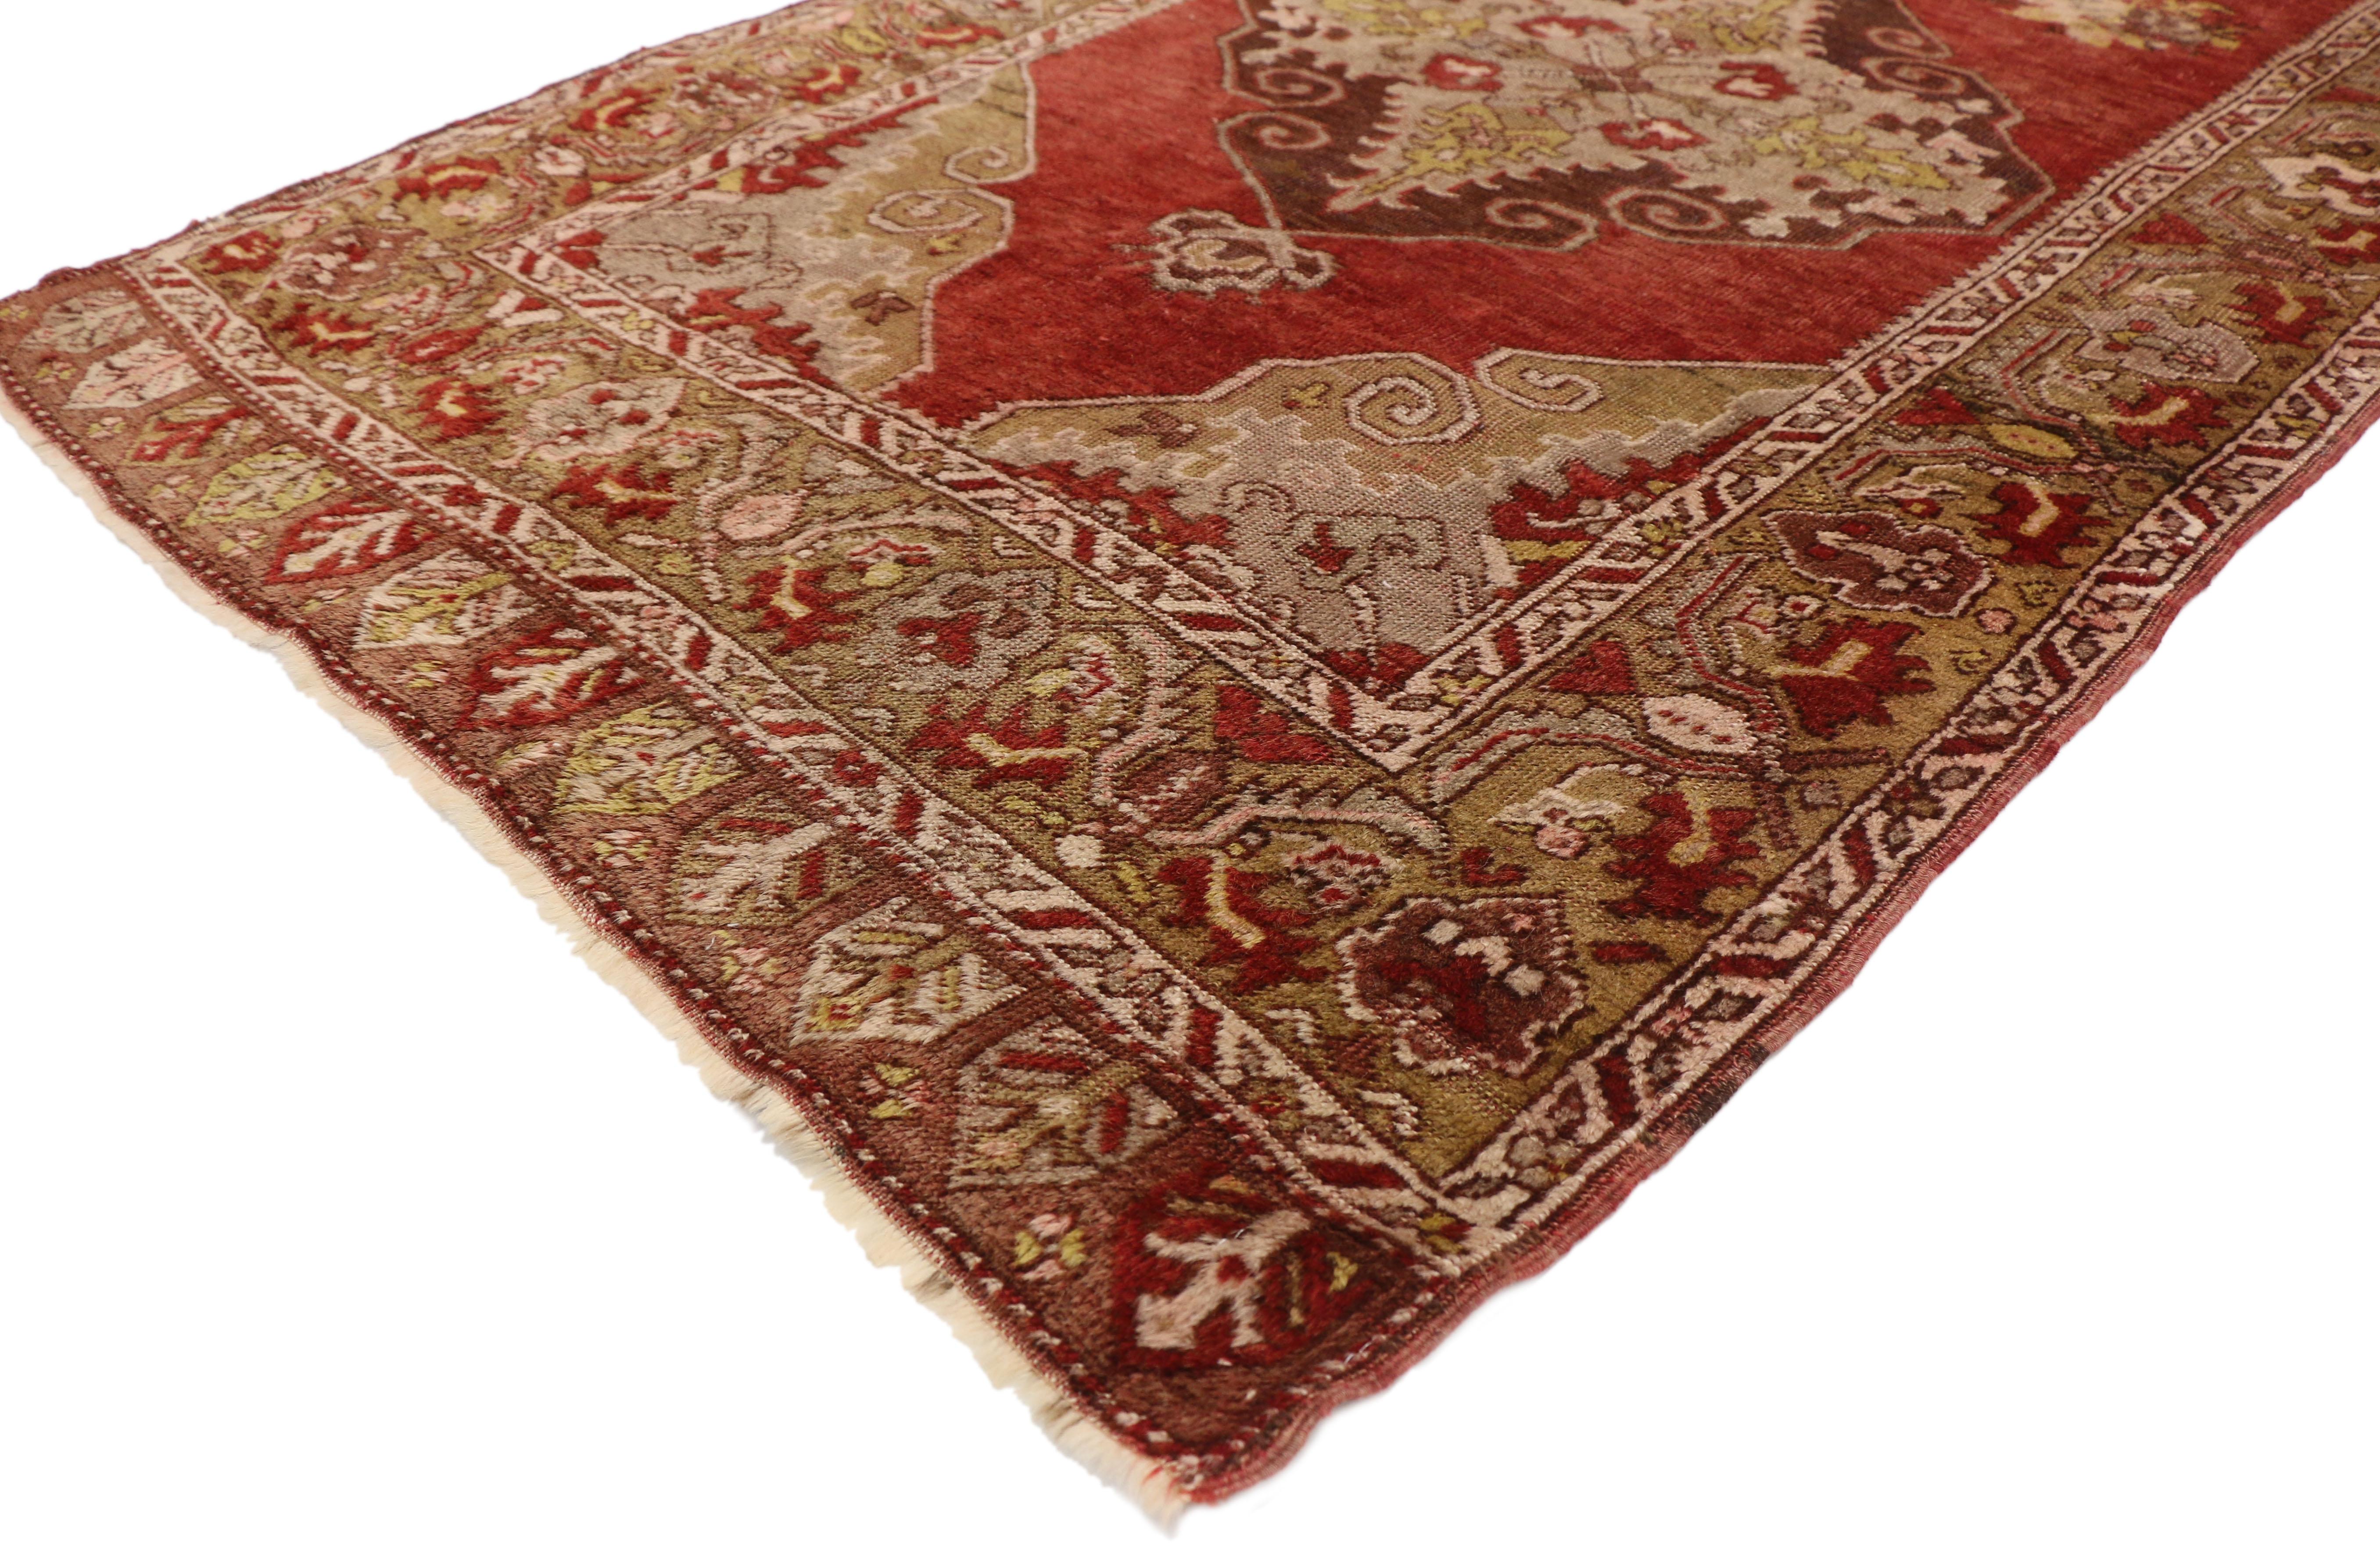 77291 vintage Turkish Oushak Hallway Runner. This hand knotted wool vintage Turkish Oushak hallway runner features three stacked lozenge medallions anchored with palmette finials floating in a sea of red abrash. The three lozenge medallions are